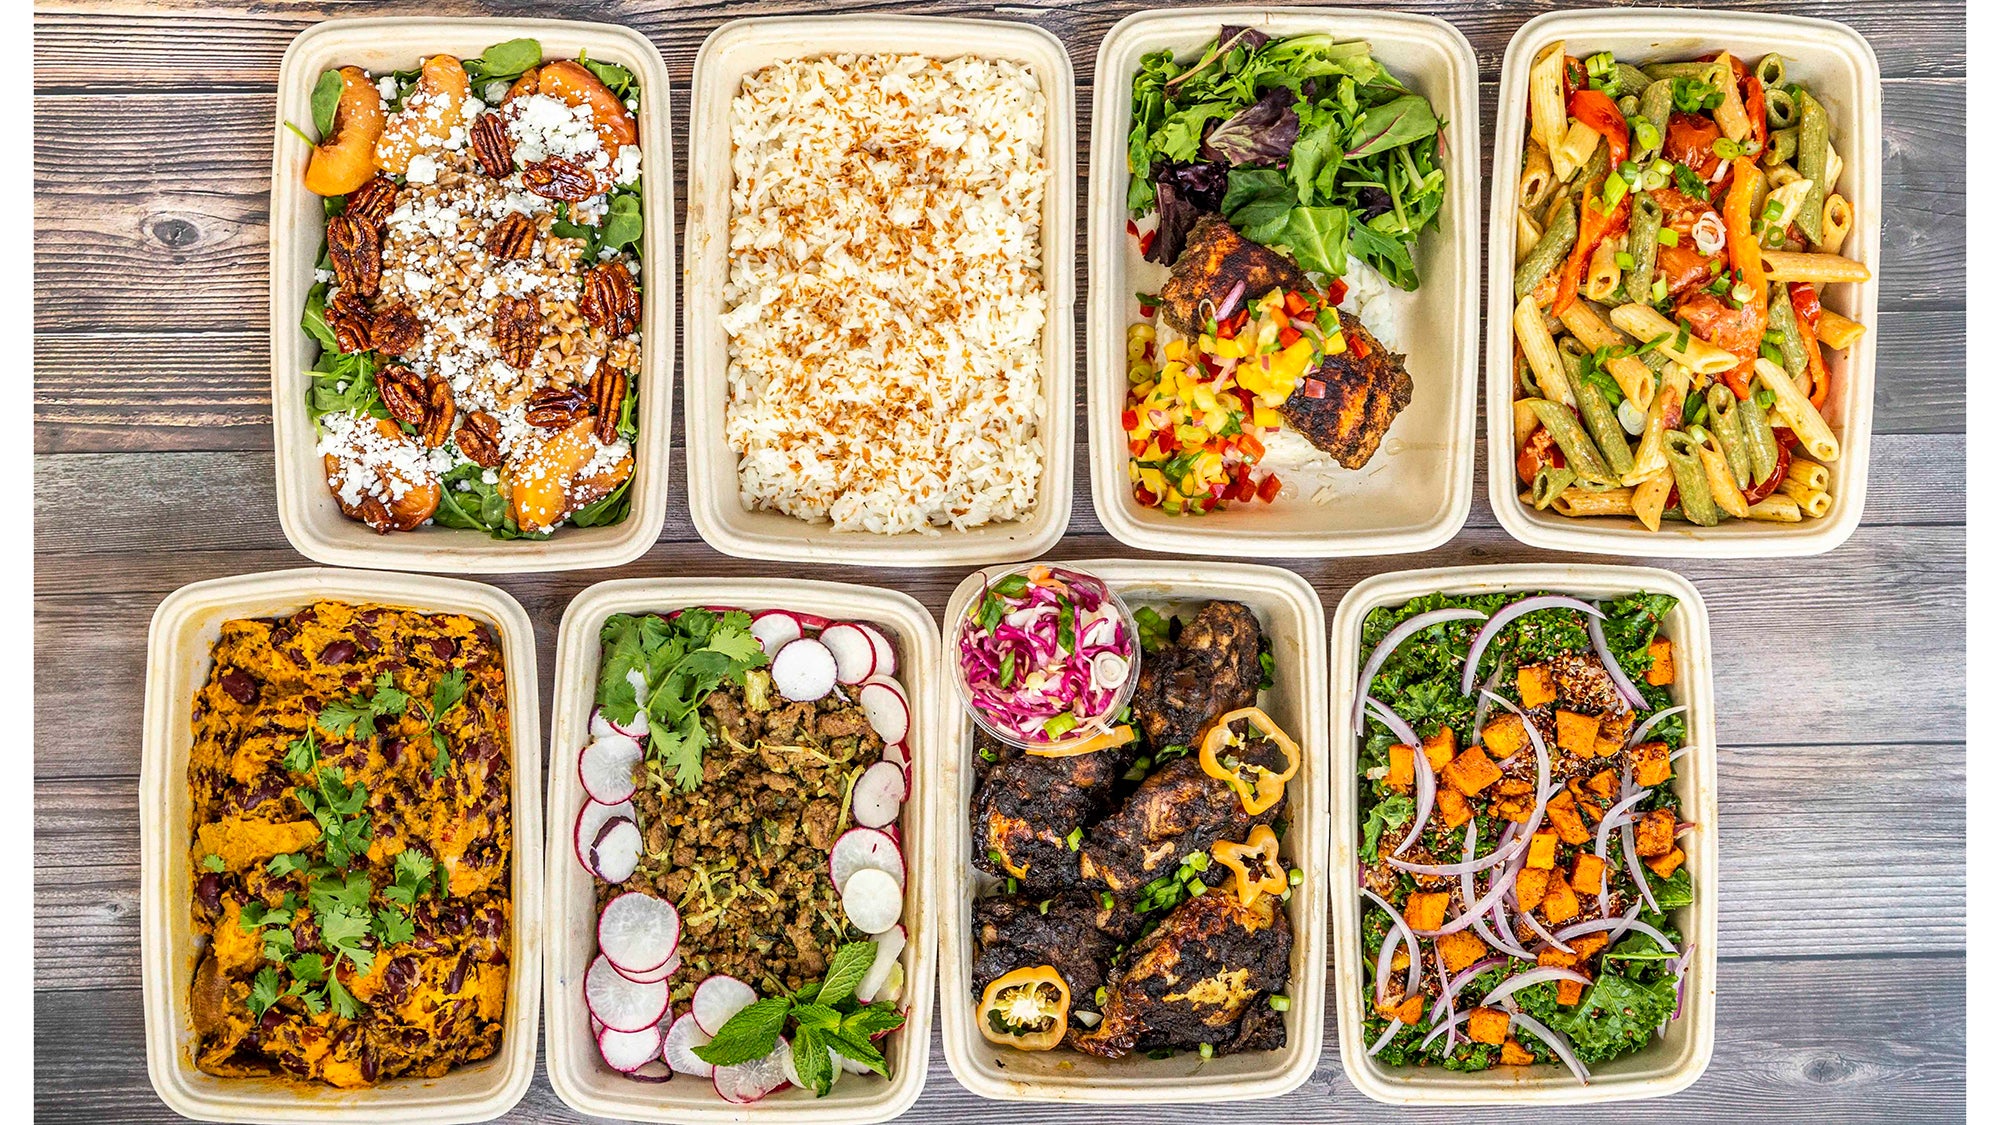 Prepared meals from Fresh Food Generation